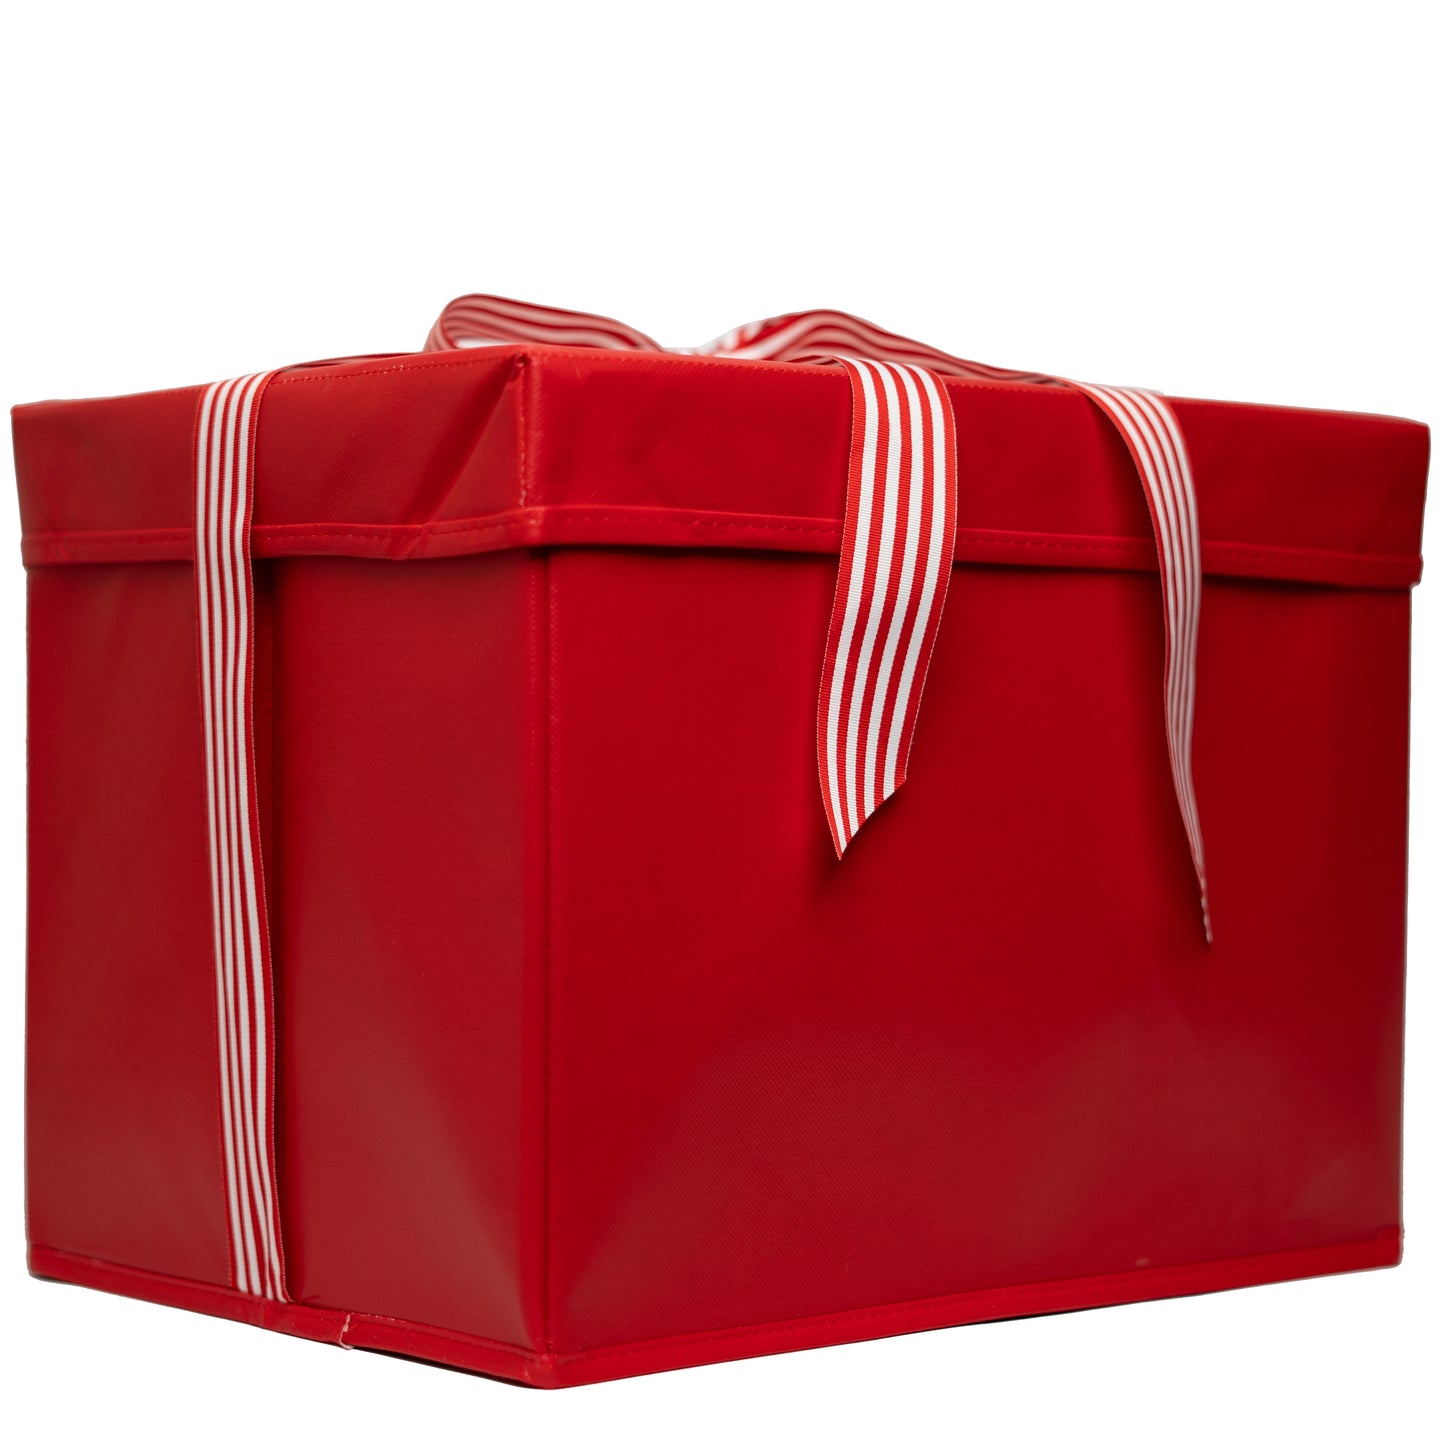 4-Piece Resuable Gift Box and Gift Bag Set in Red: 2 Extra Strong Collapsible Gift Boxes with Ribbon Closure Attached, 1 Gift Bag with Magnet Closure and 1 Gift Bag with Satin Closure - EverWrap